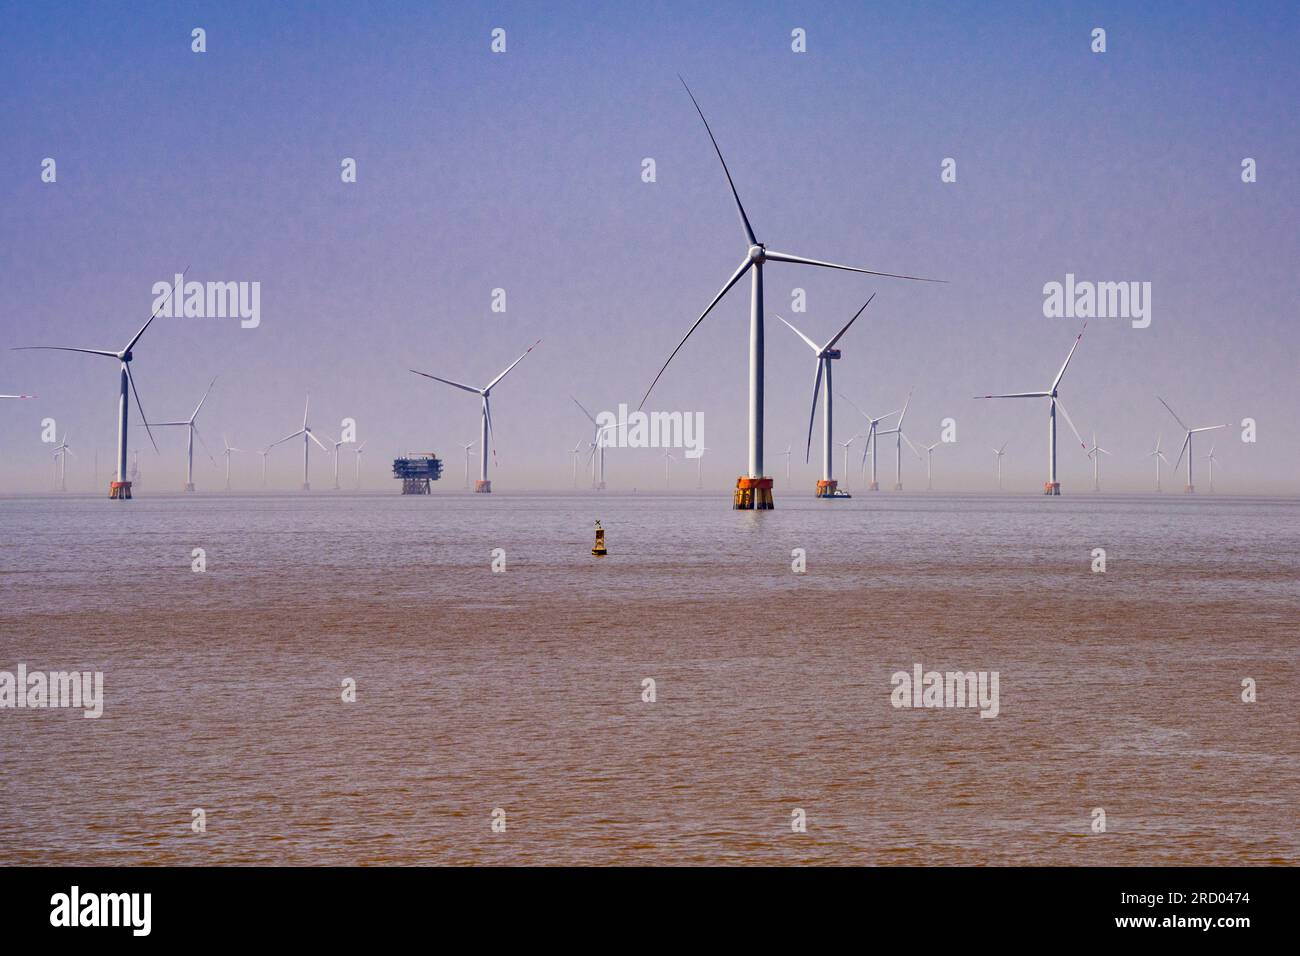 Wind turbines in the East Sea near Shanghai’s Yangshan Port which is technically in Zhoushan, Zhejiang Province, China. Stock Photo